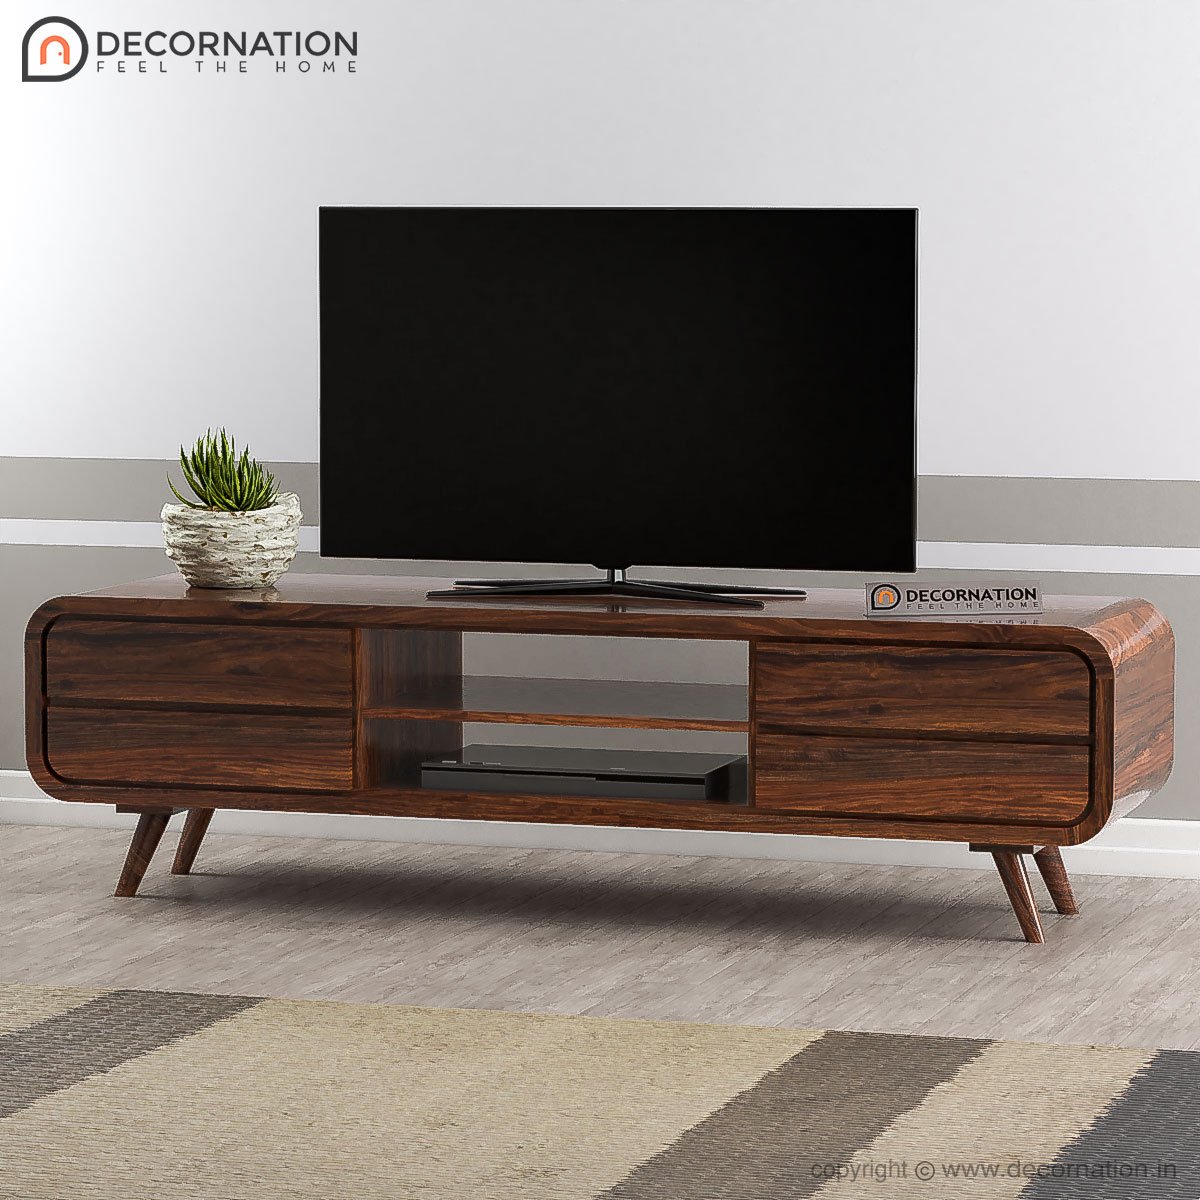 Dorian Wood TV Table With Storage- Brown